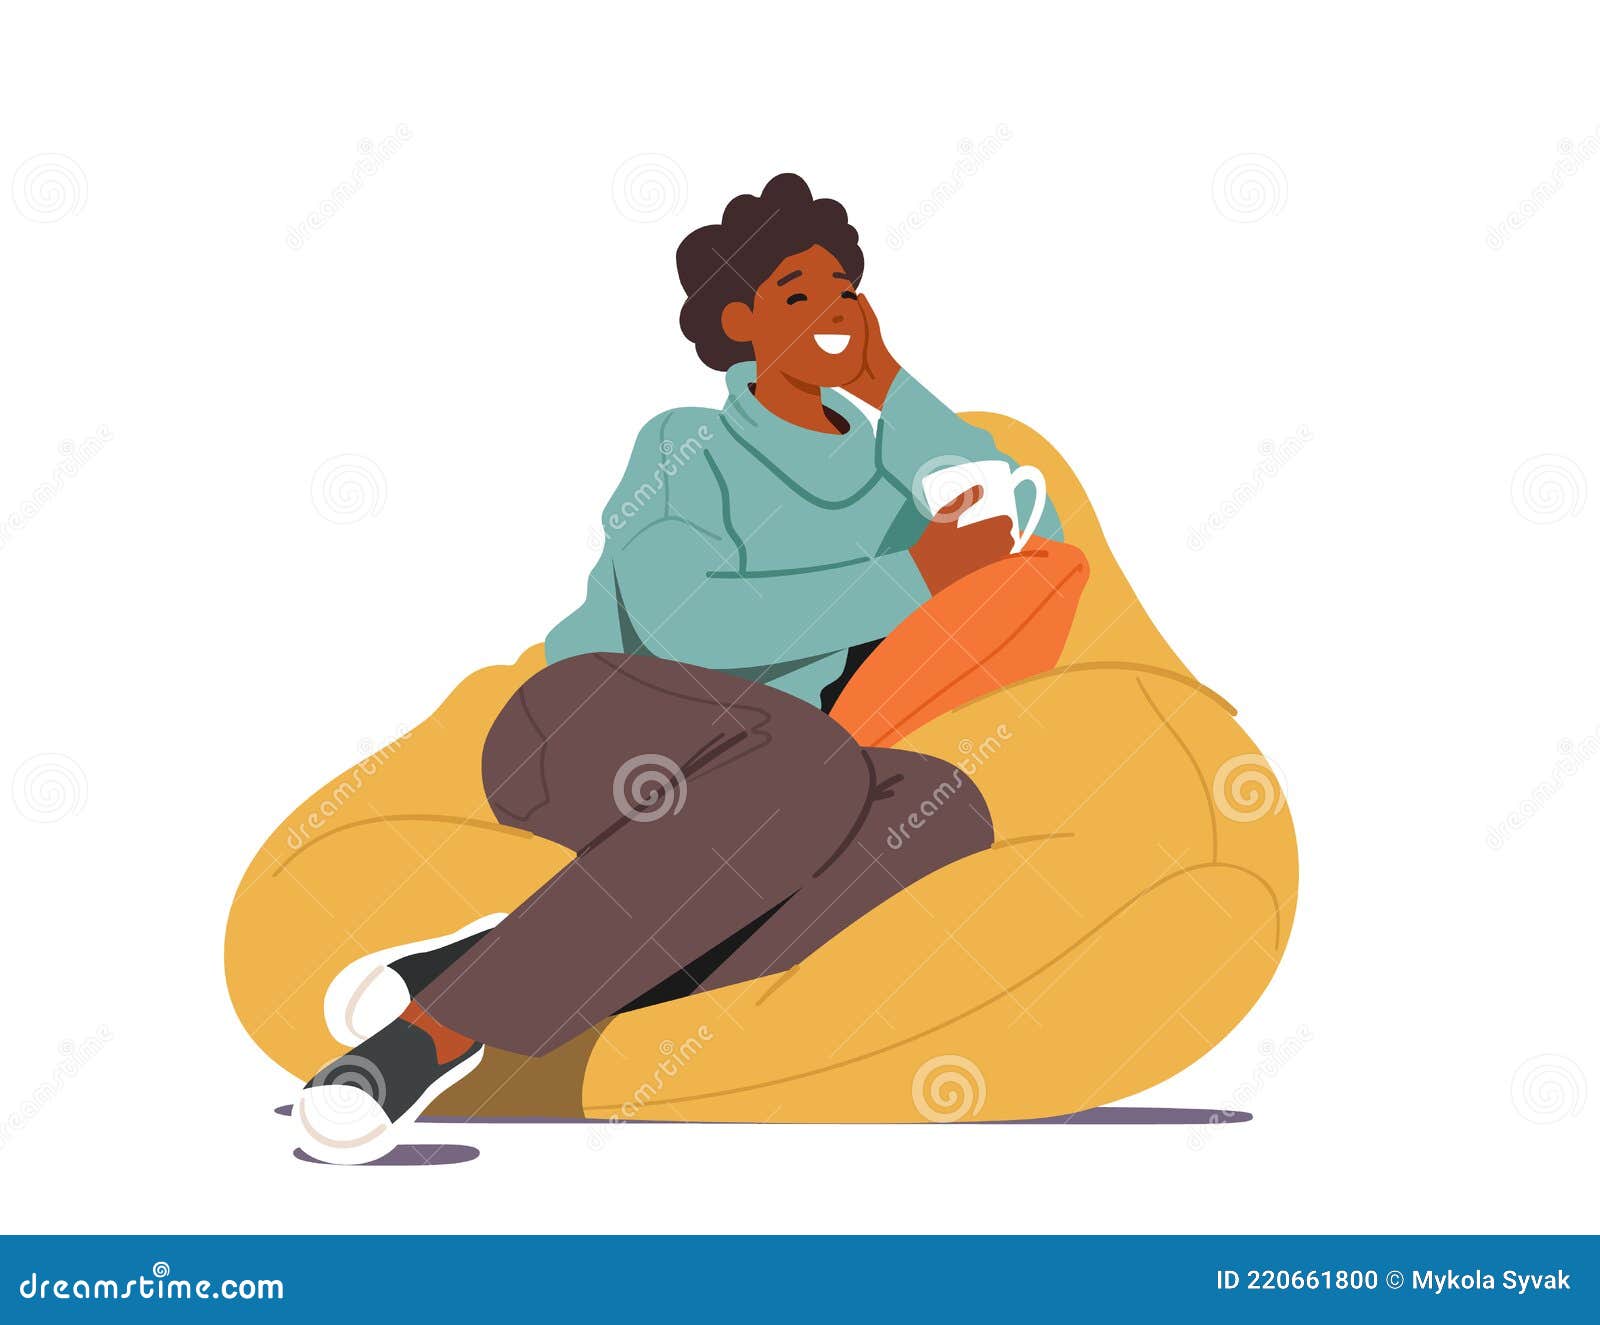 young woman sit on bean bag with cup of tea or coffee in hand at home. female character visiting friend, having leisure